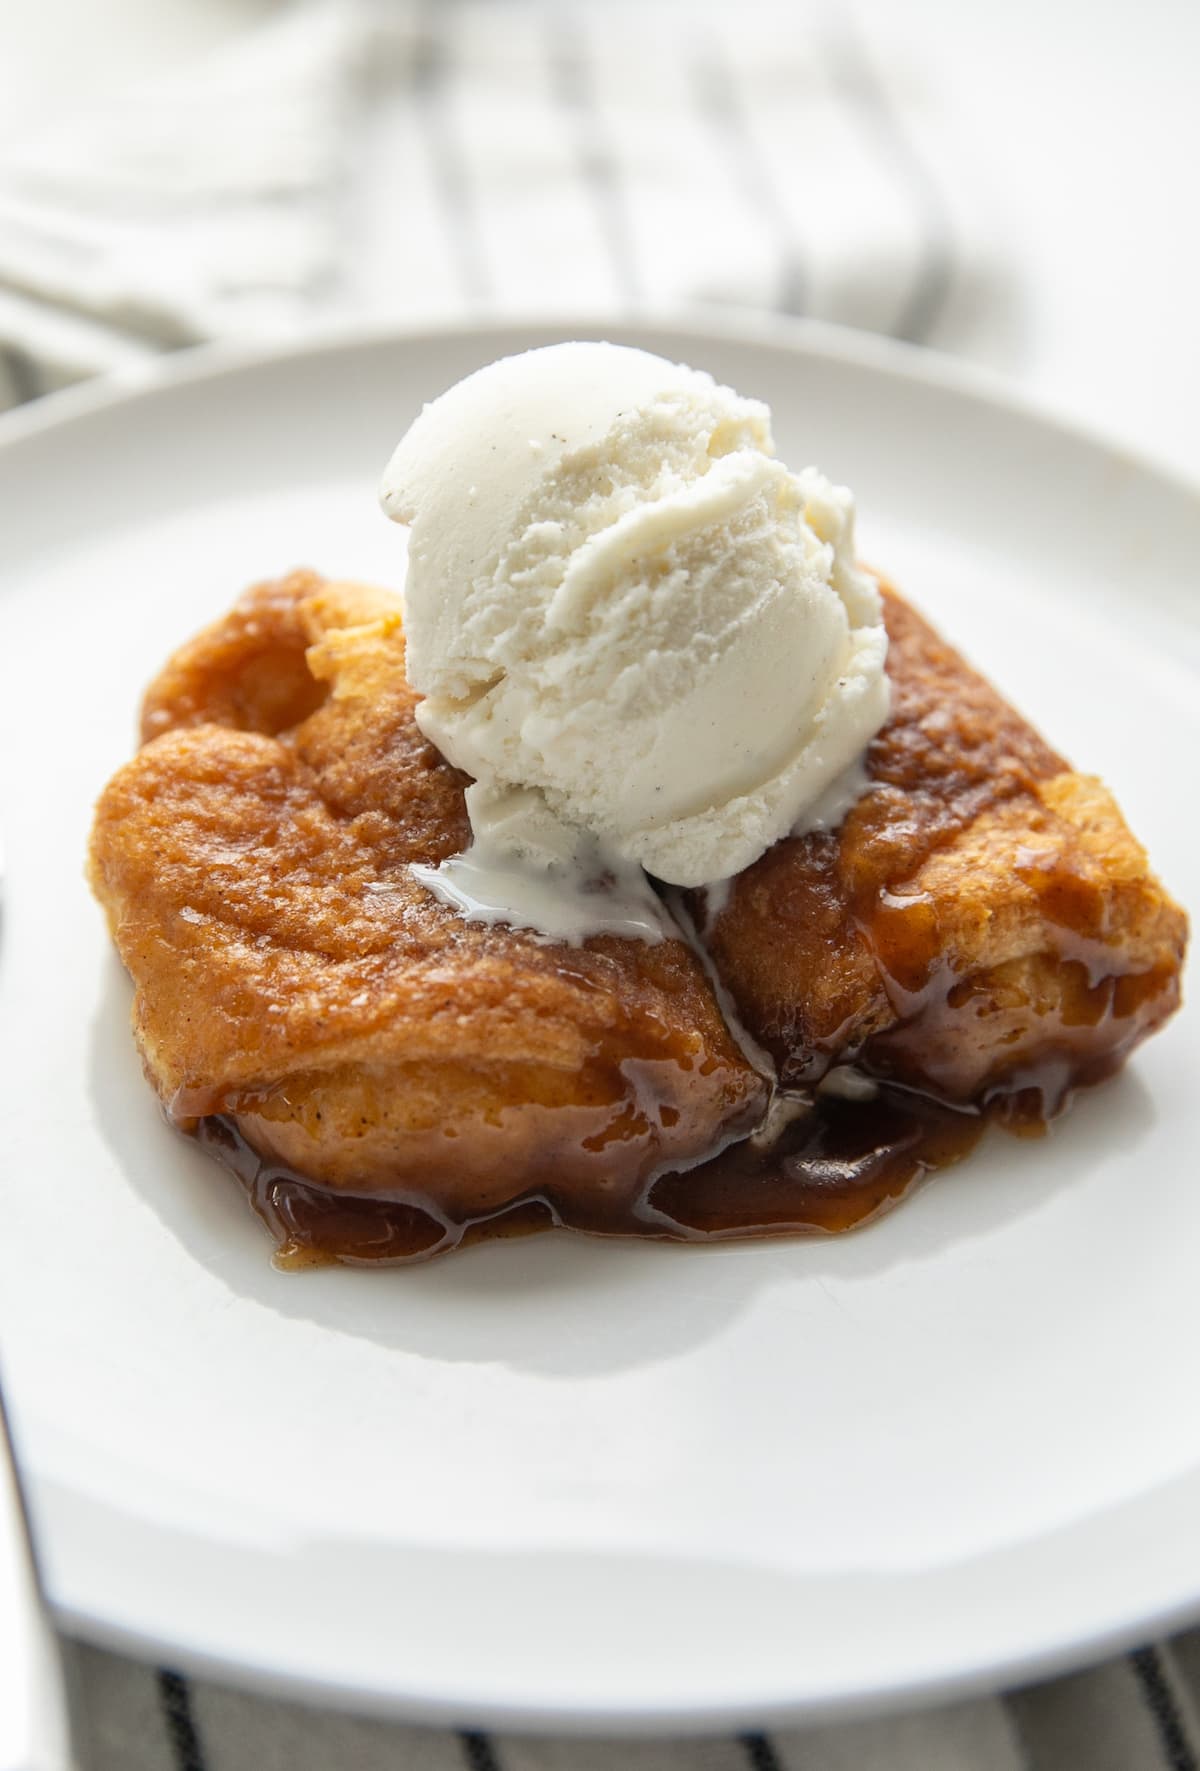 two apple dumplings on plate with ice cream